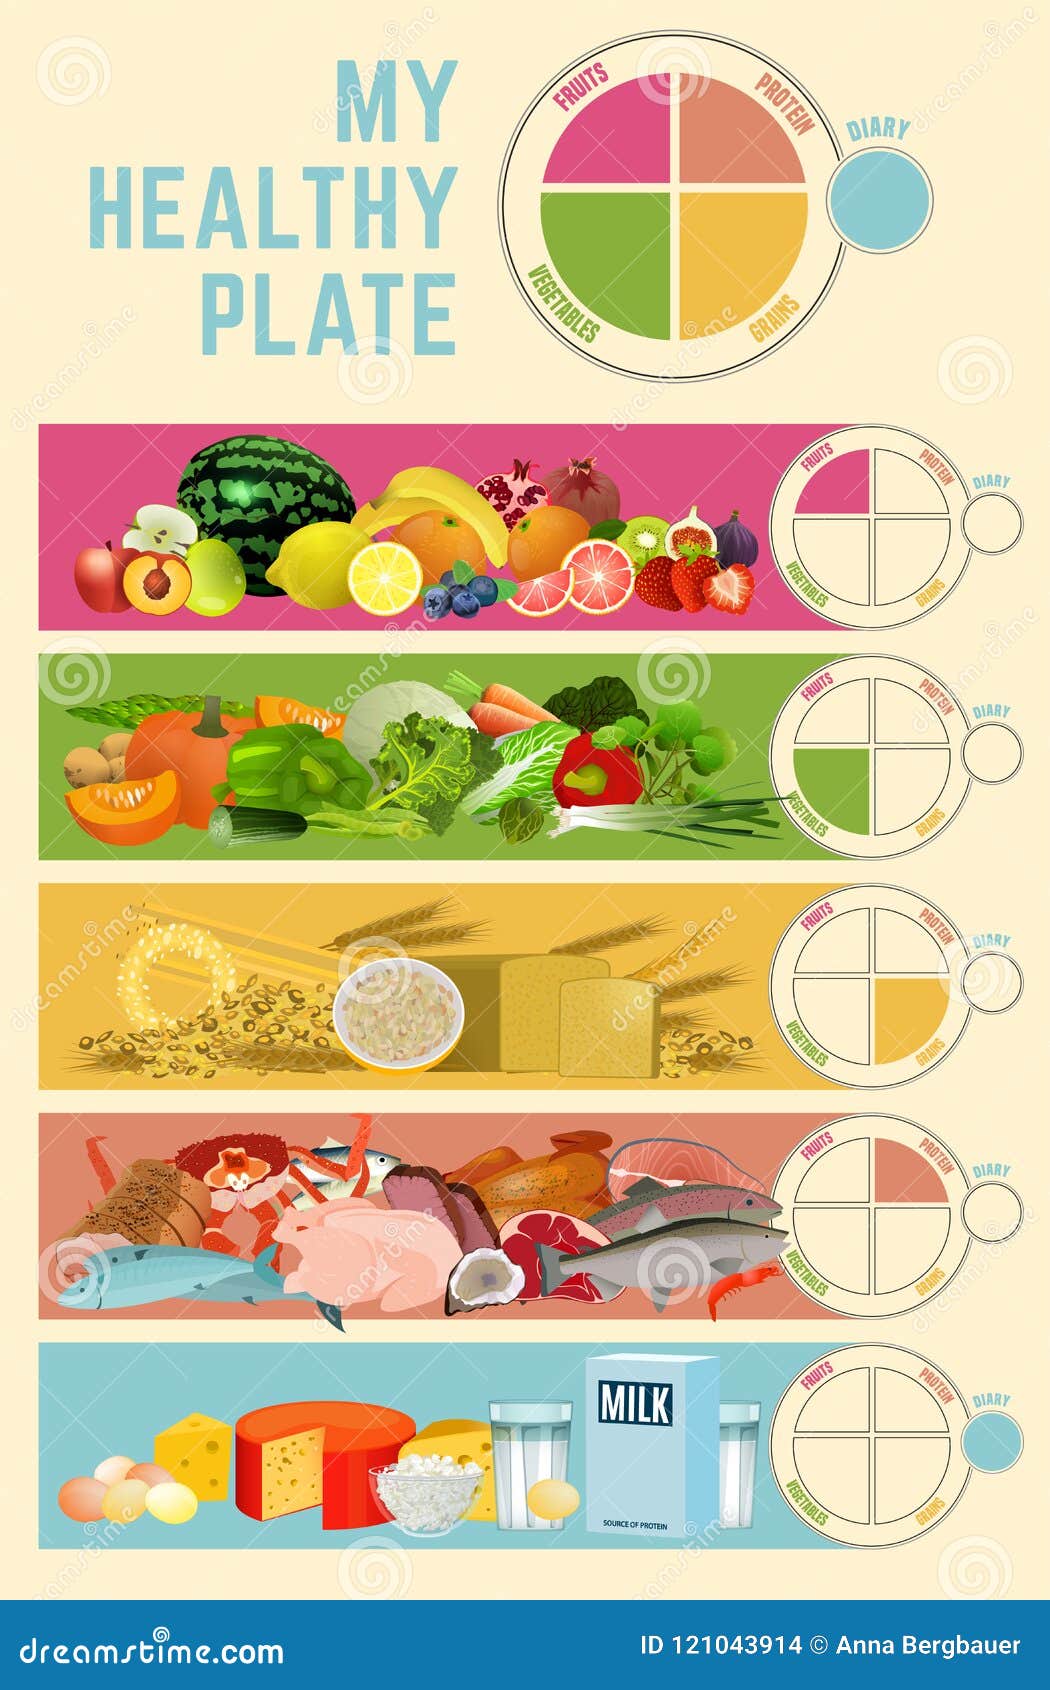 Healthy Eating Tips Infographic Chart Food Balance Proper Nutrition  Proportions Stock Vector by ©yatate10.gmail.com 385331918